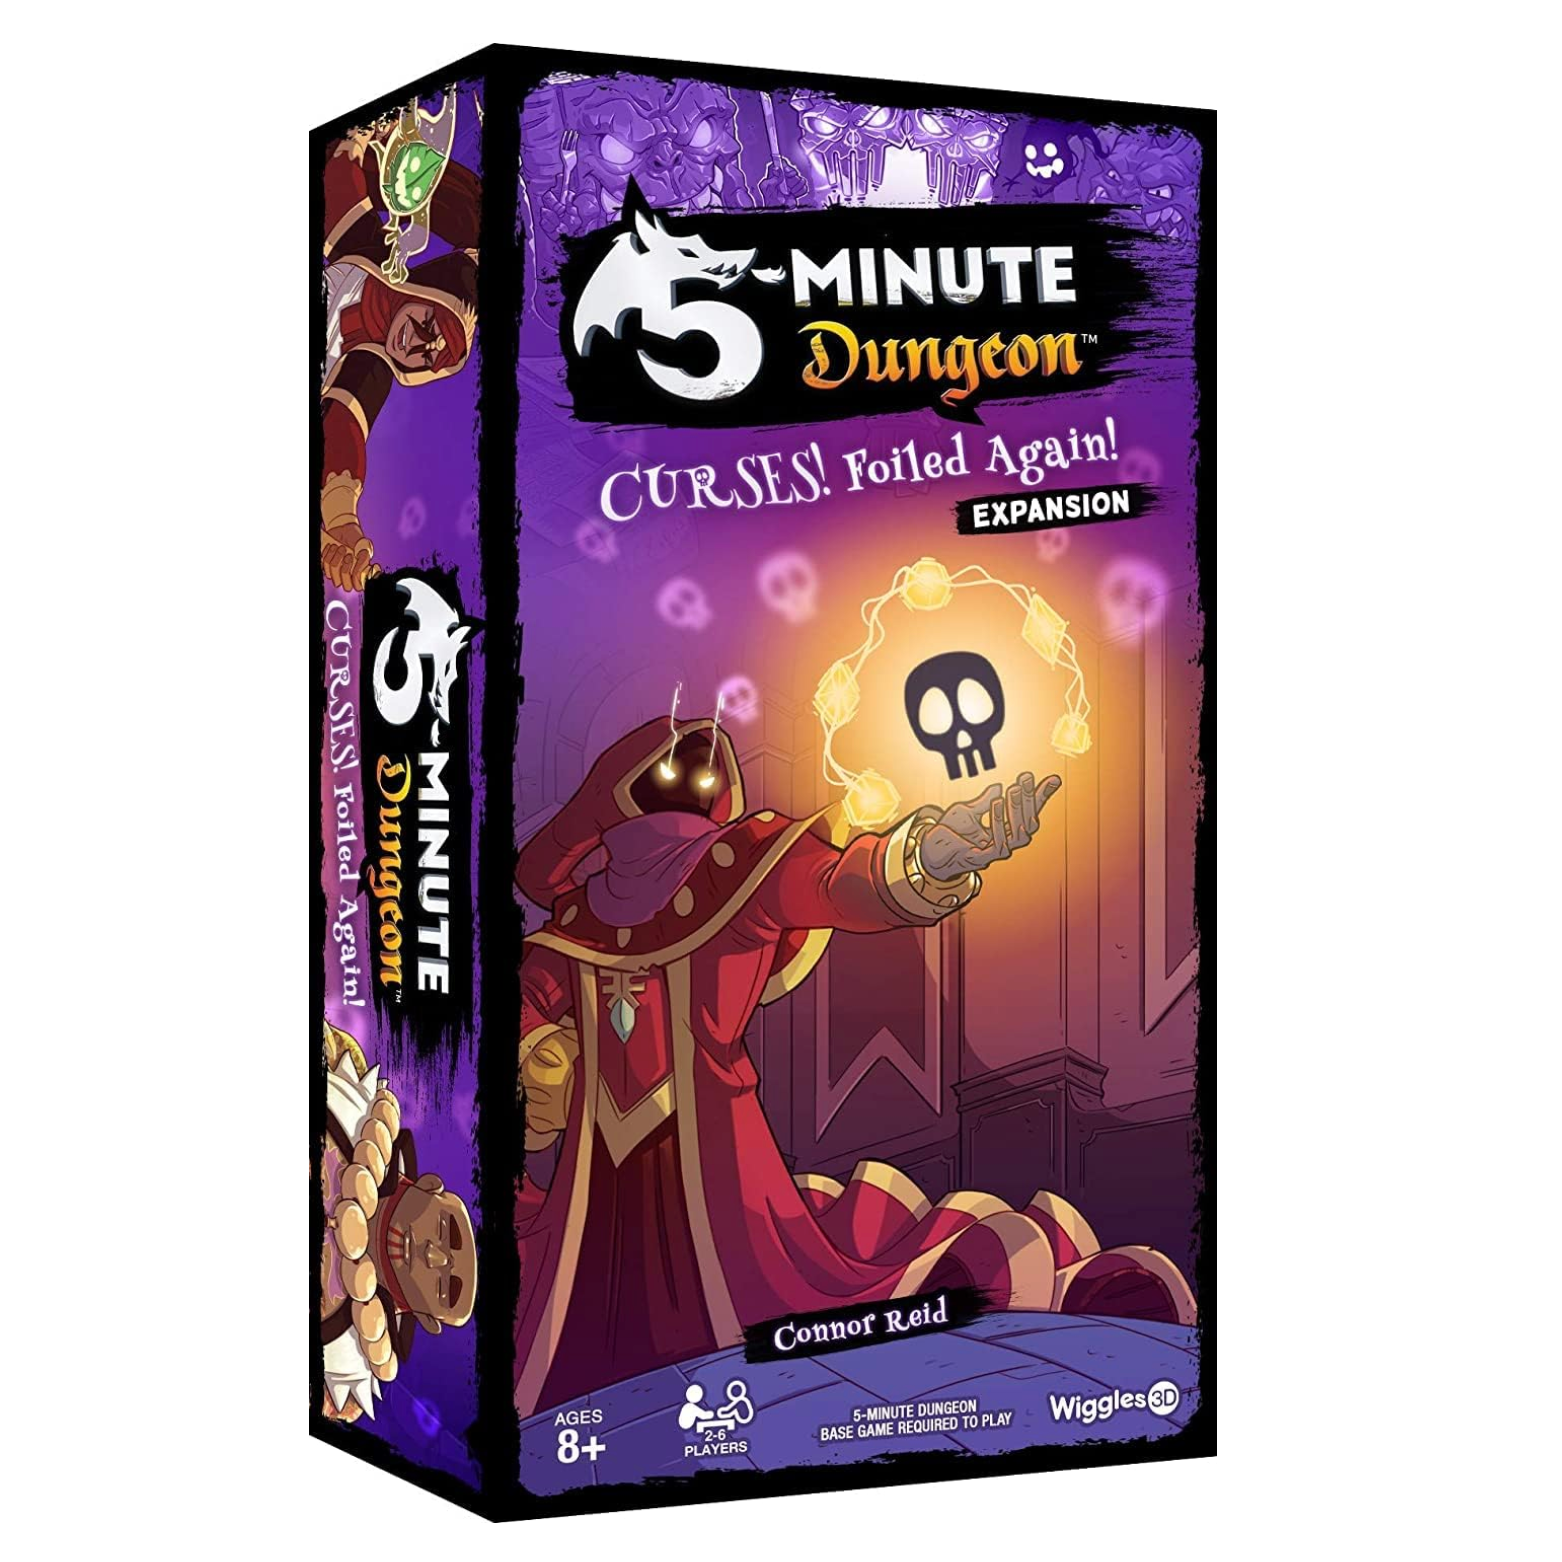 5-Minute Dungeon: Curses Foiled Again Expansion